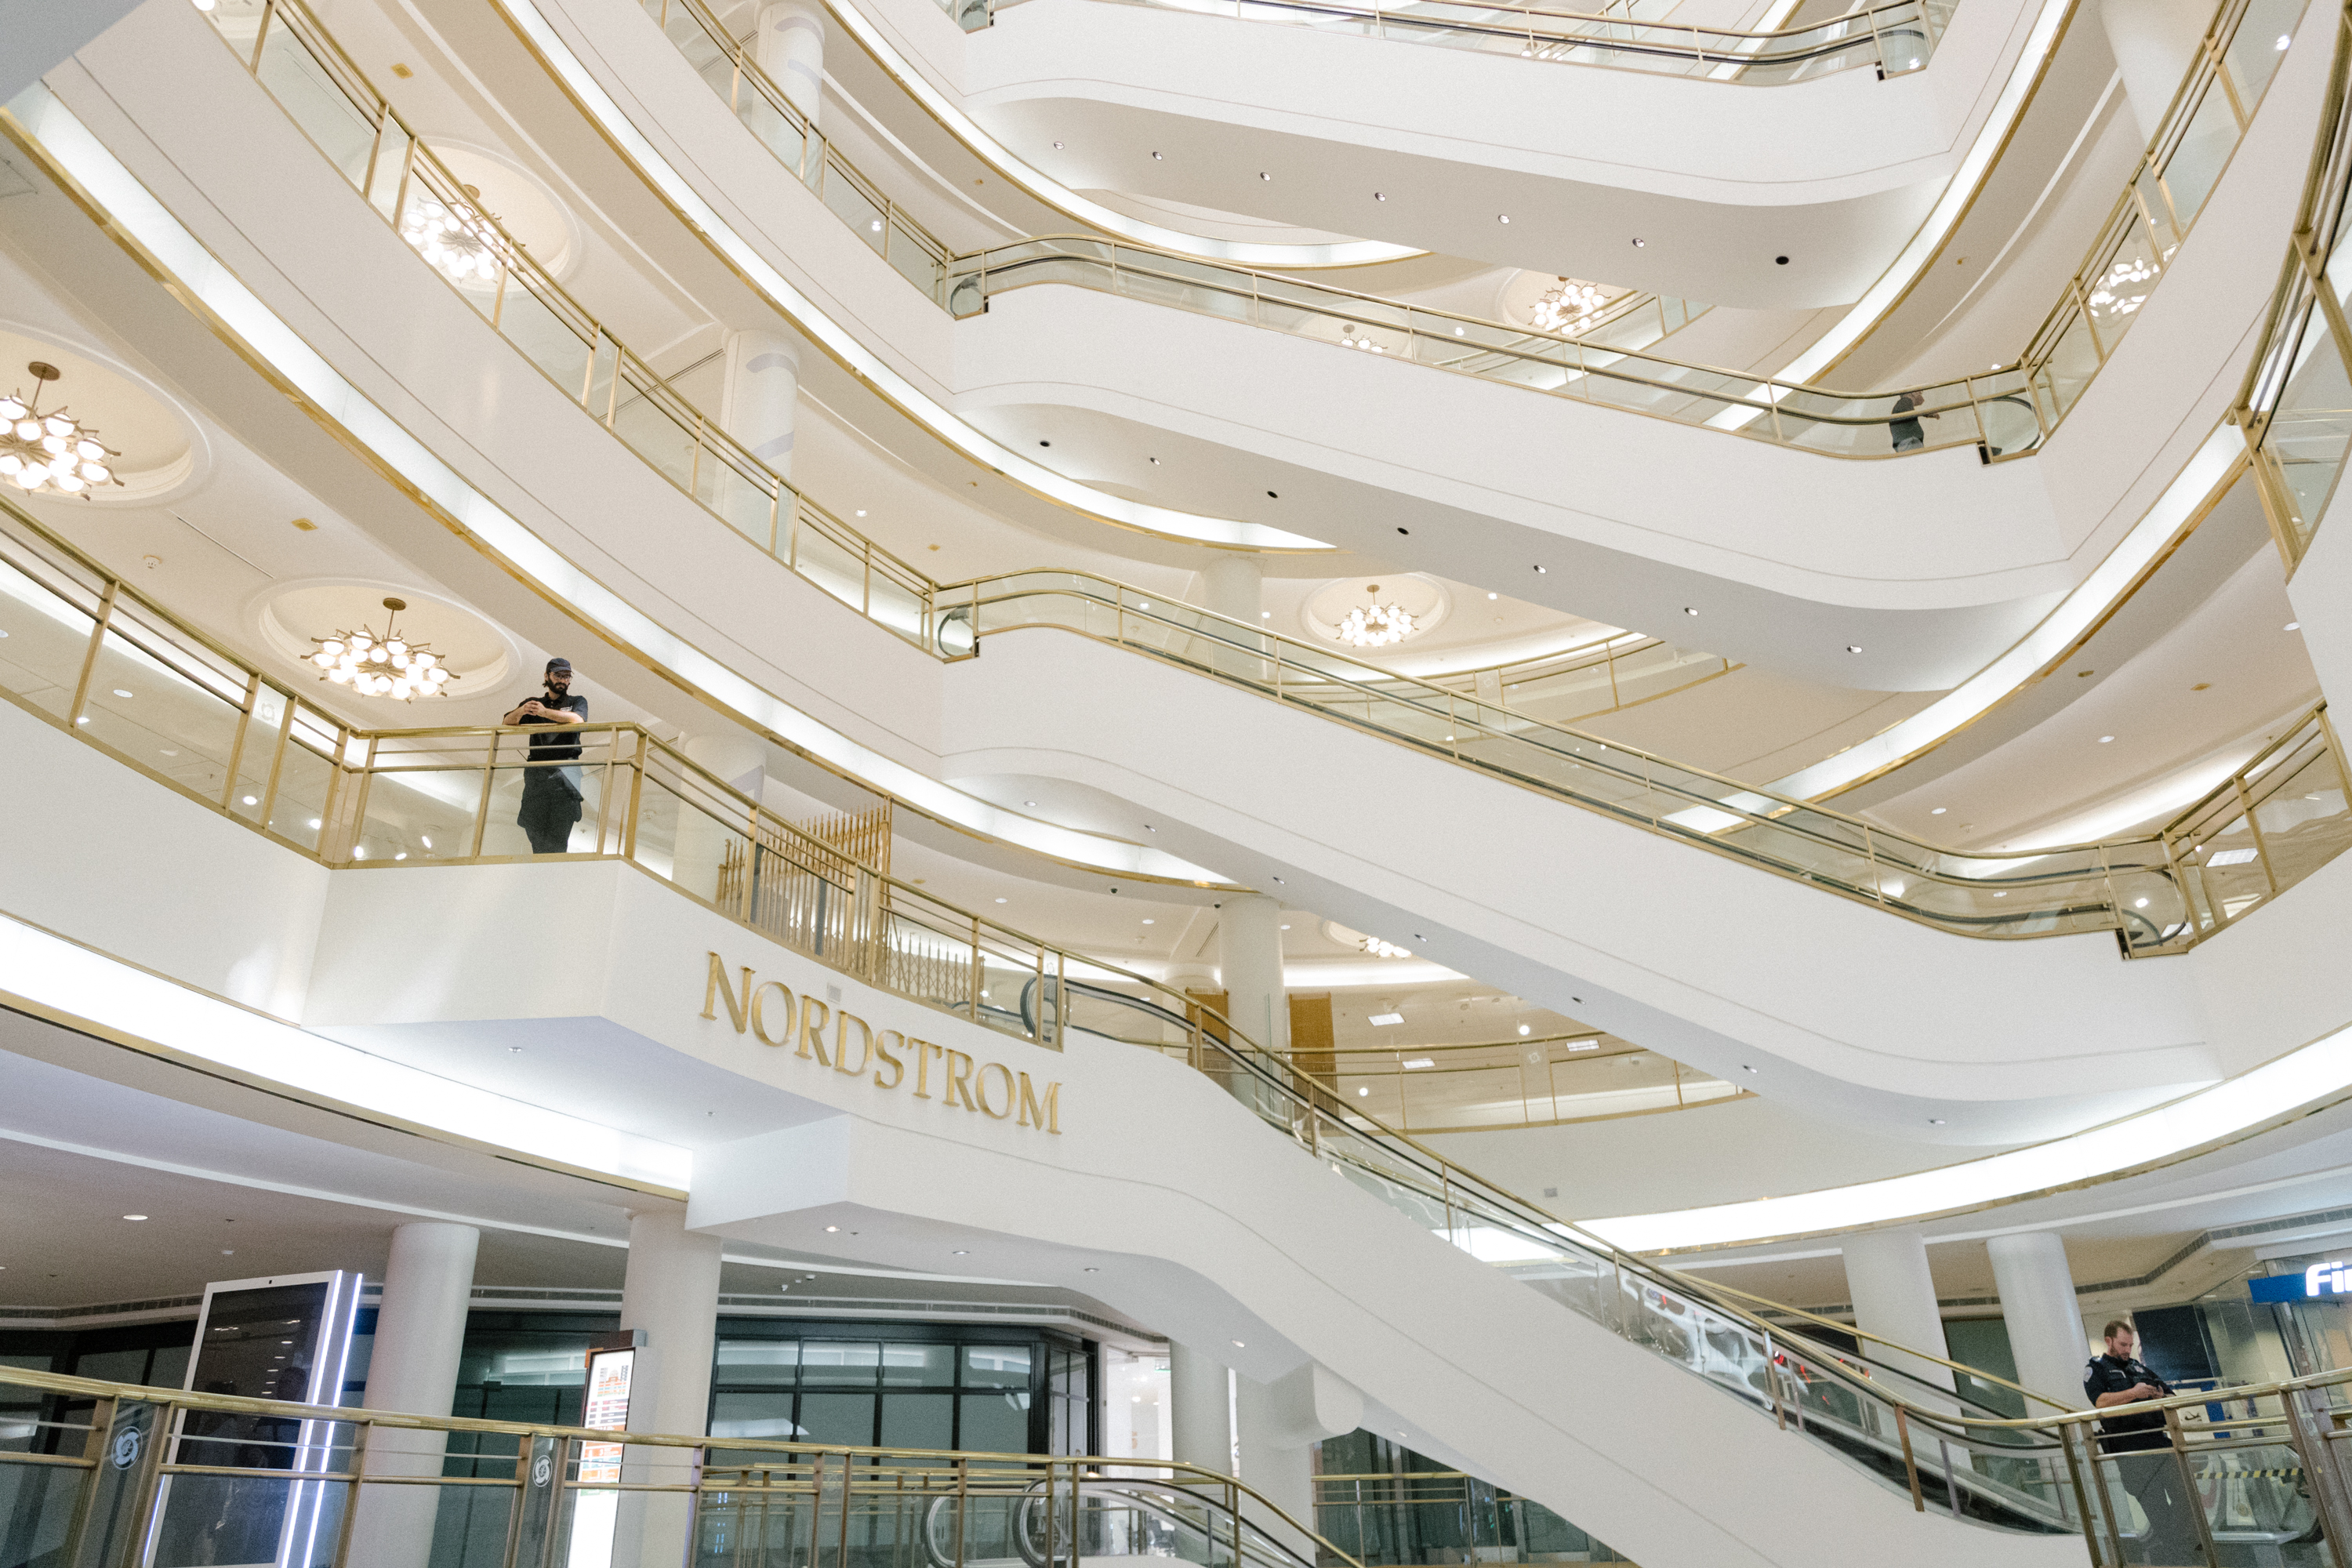 An indoor view of a multi-level shopping area with escalators, elegant railings, and the Nordstrom sign.